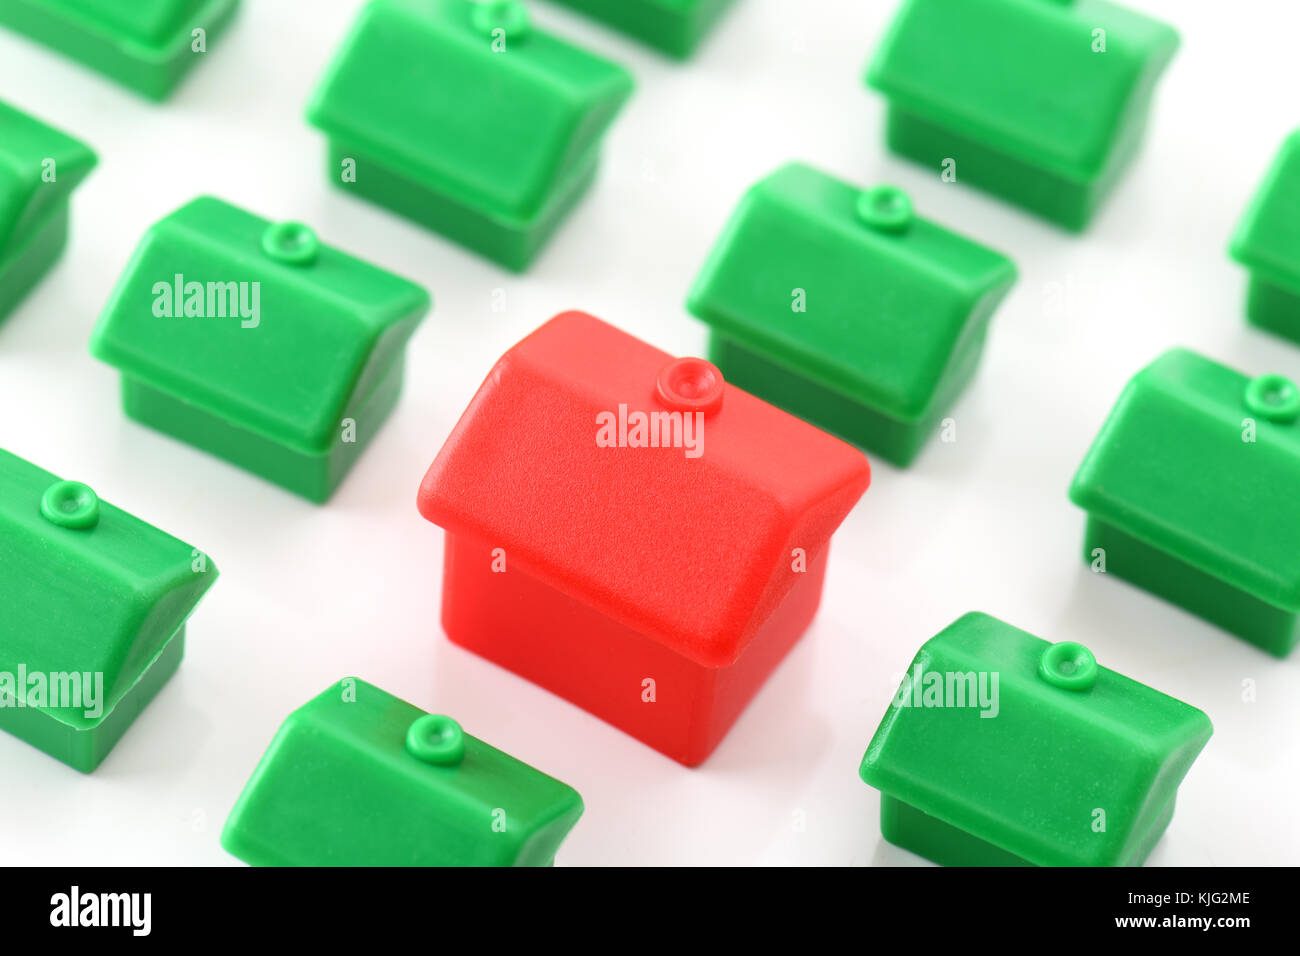 Large red house standing out from small green houses Stock Photo